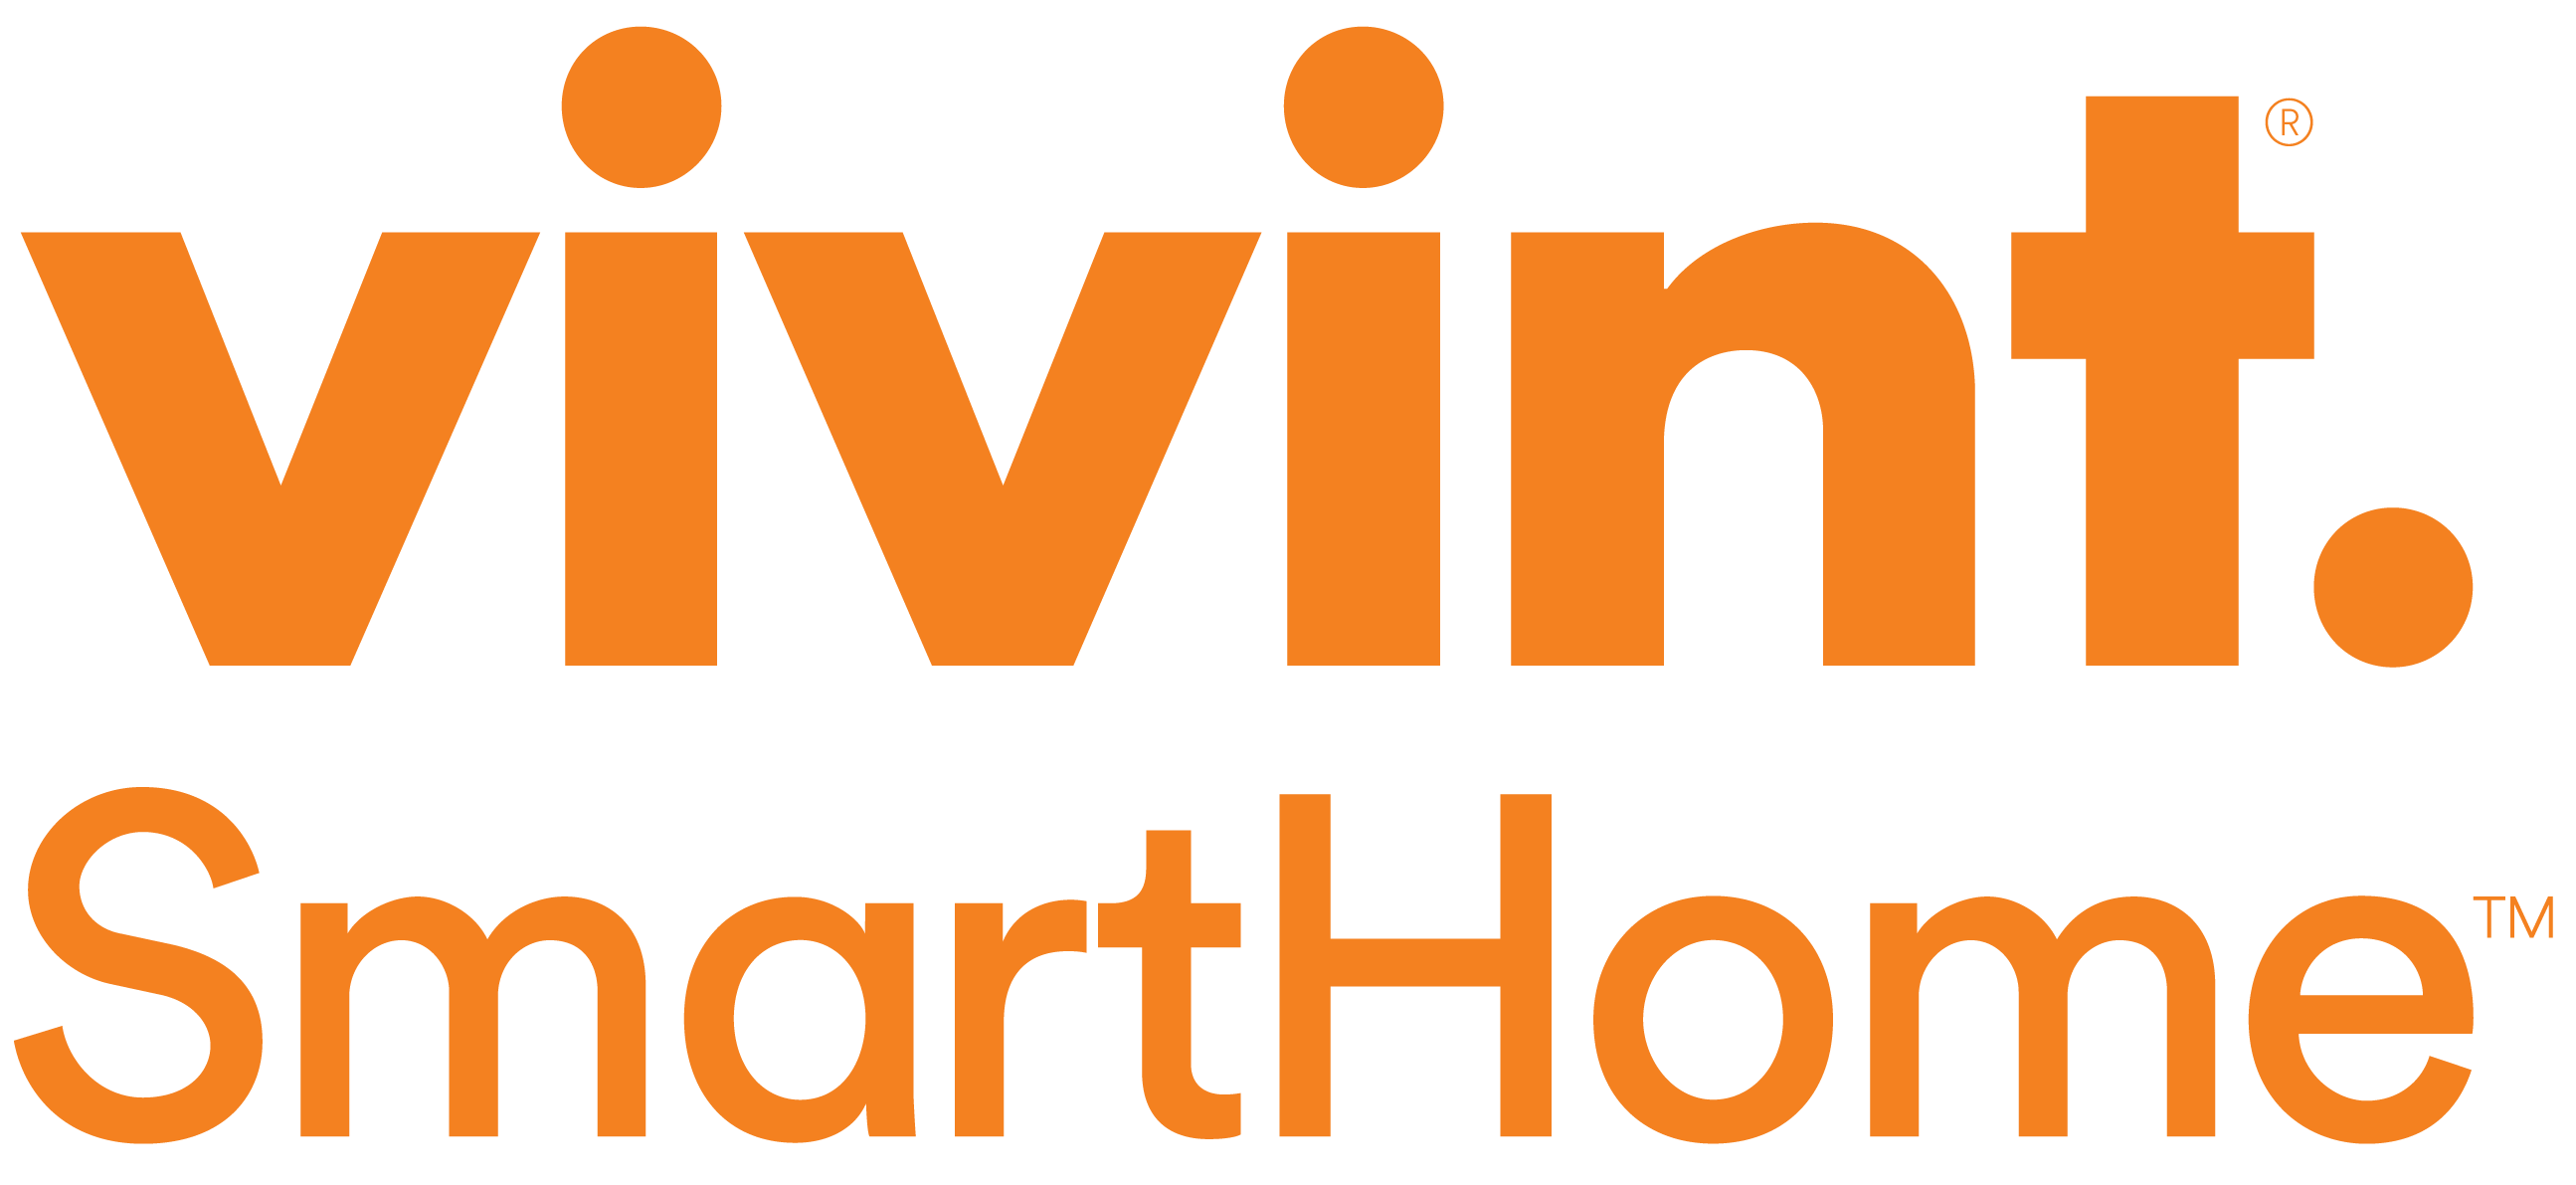 Vivint Re Myhomesecuritypro